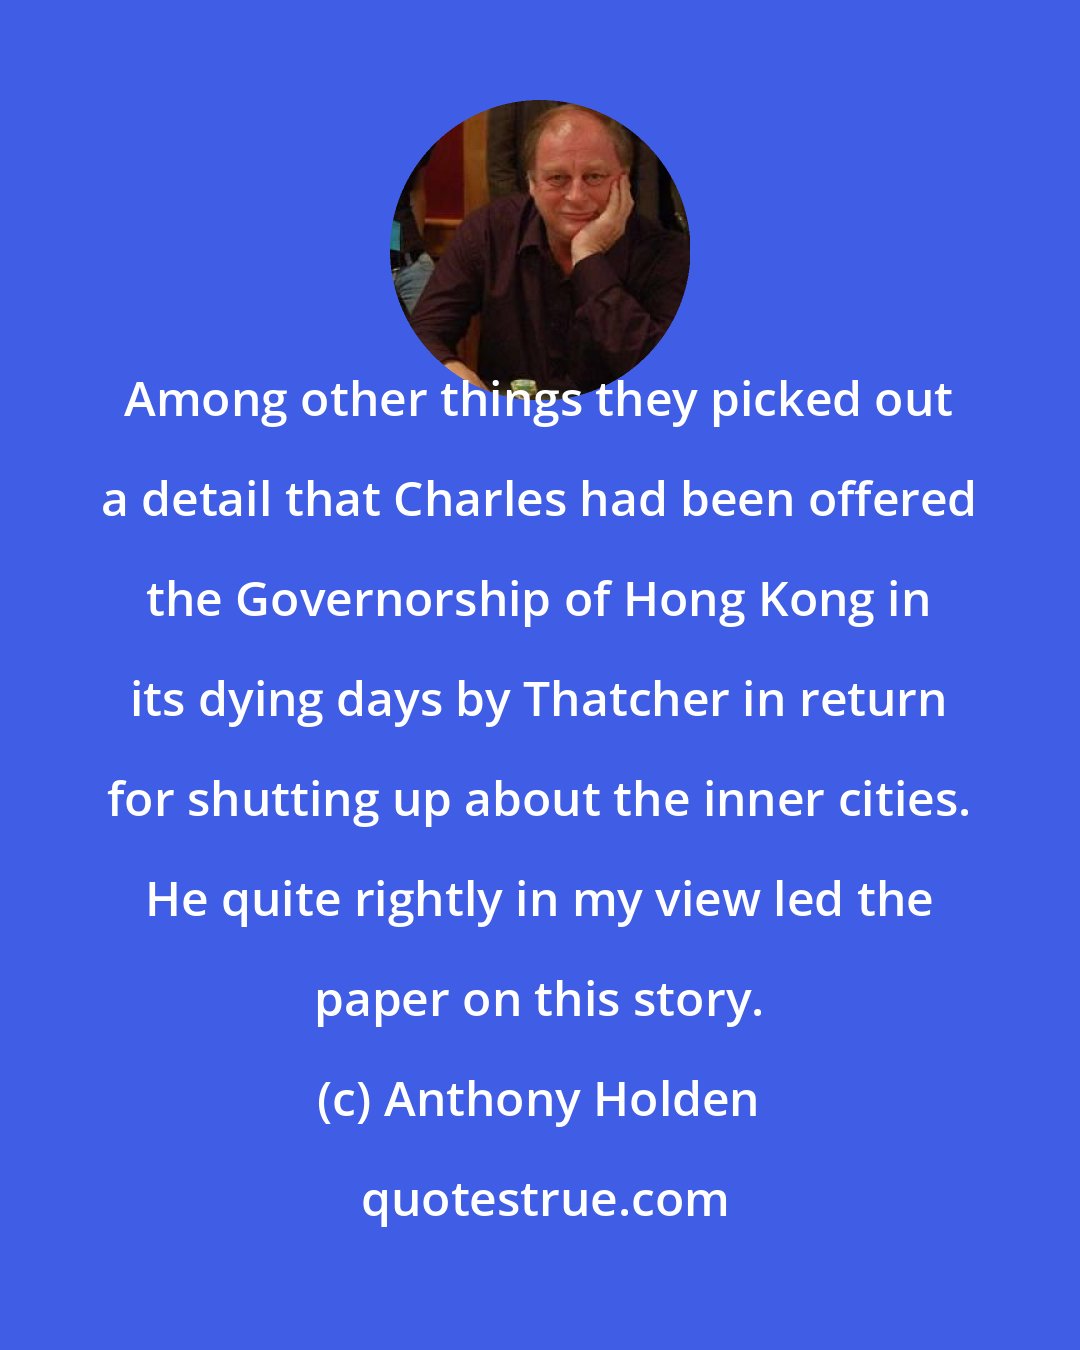 Anthony Holden: Among other things they picked out a detail that Charles had been offered the Governorship of Hong Kong in its dying days by Thatcher in return for shutting up about the inner cities. He quite rightly in my view led the paper on this story.